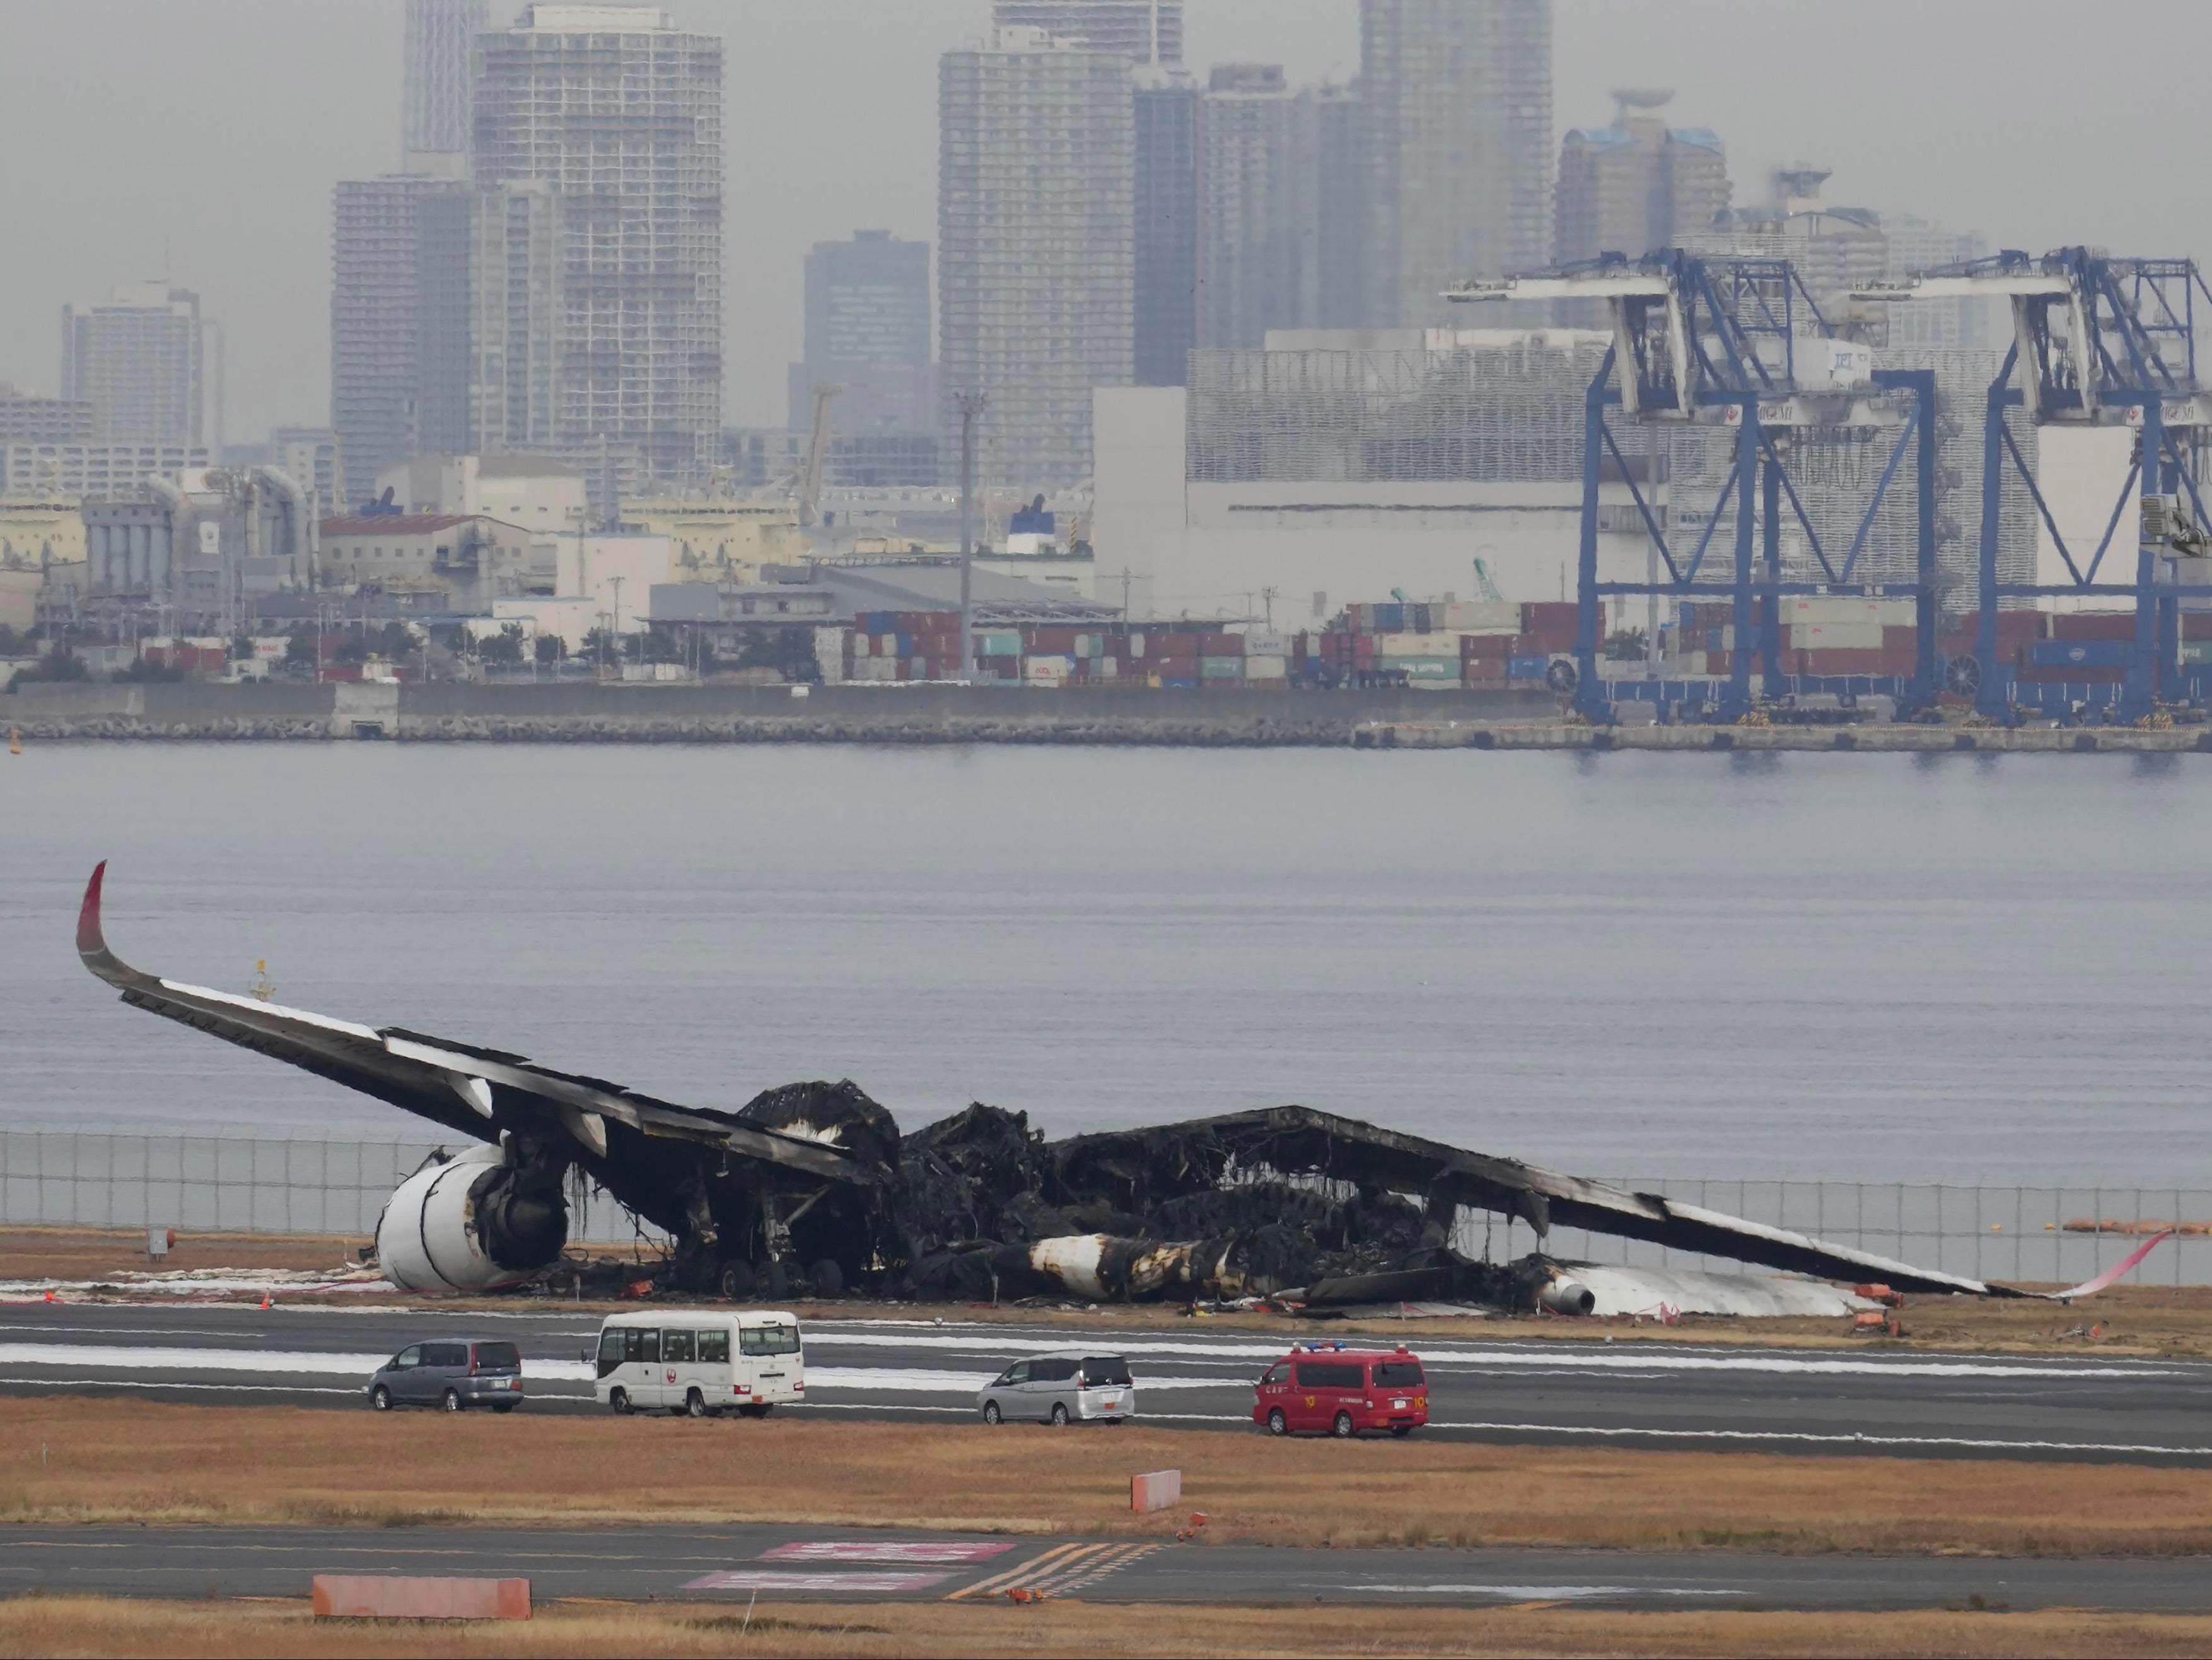 The burn-out wreckage of Japan Airlines plane is seen at Haneda airport